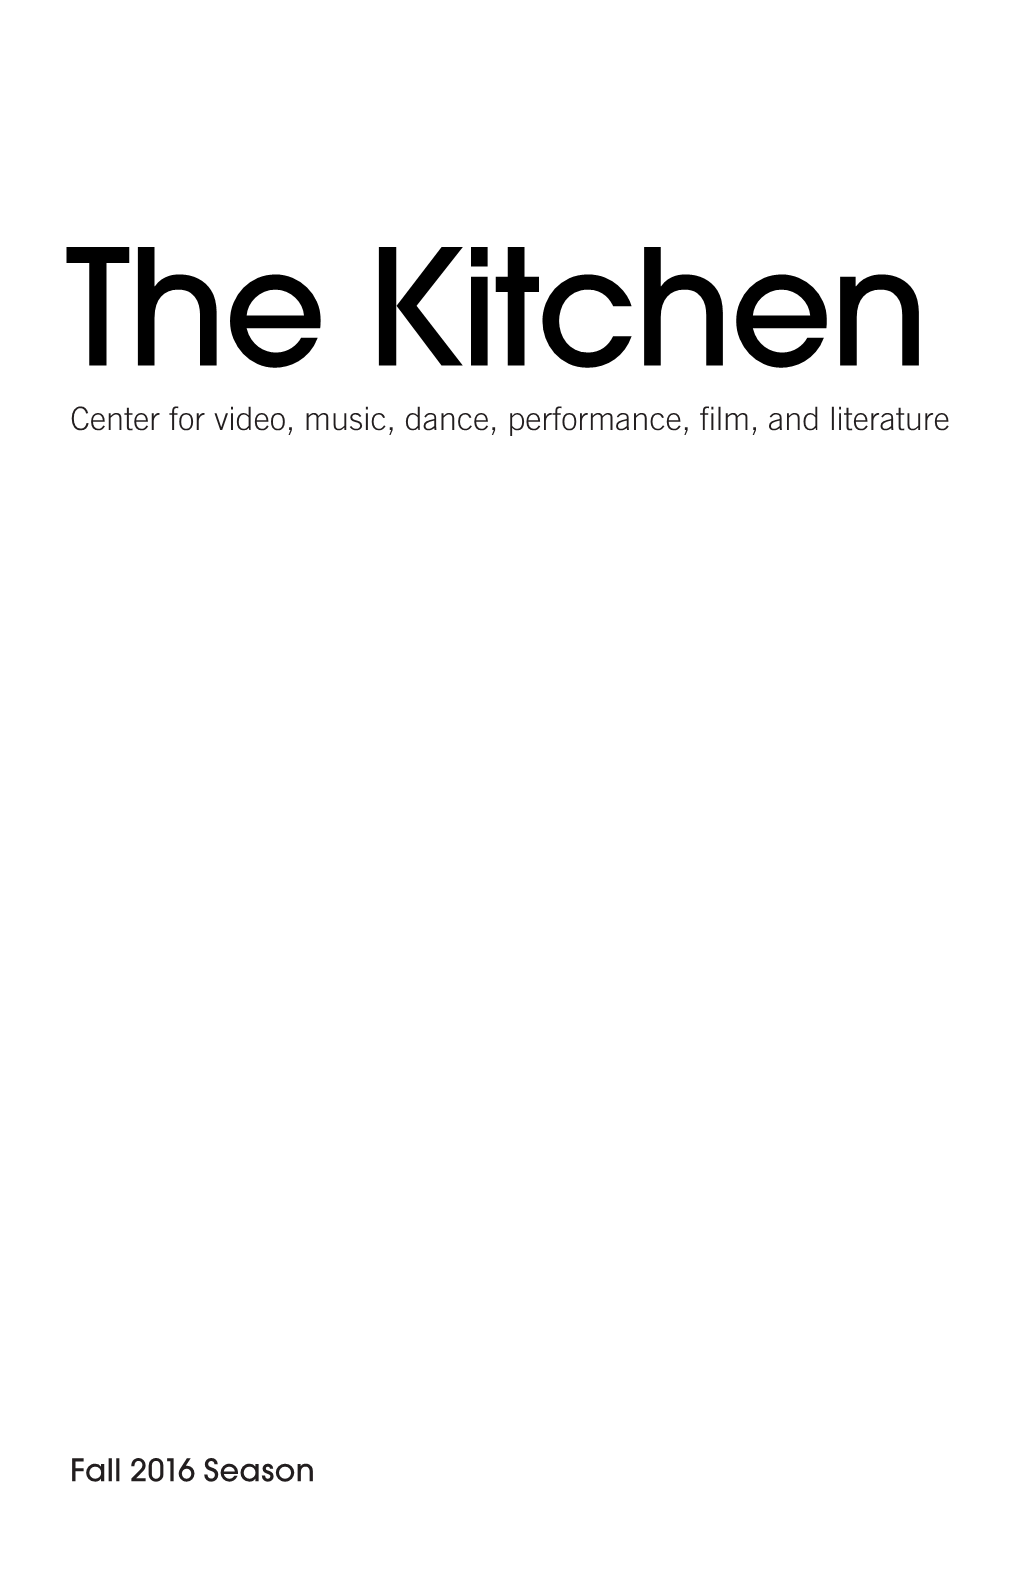 The Kitchen Center for Video, Music, Dance, Performance, Film, and Literature